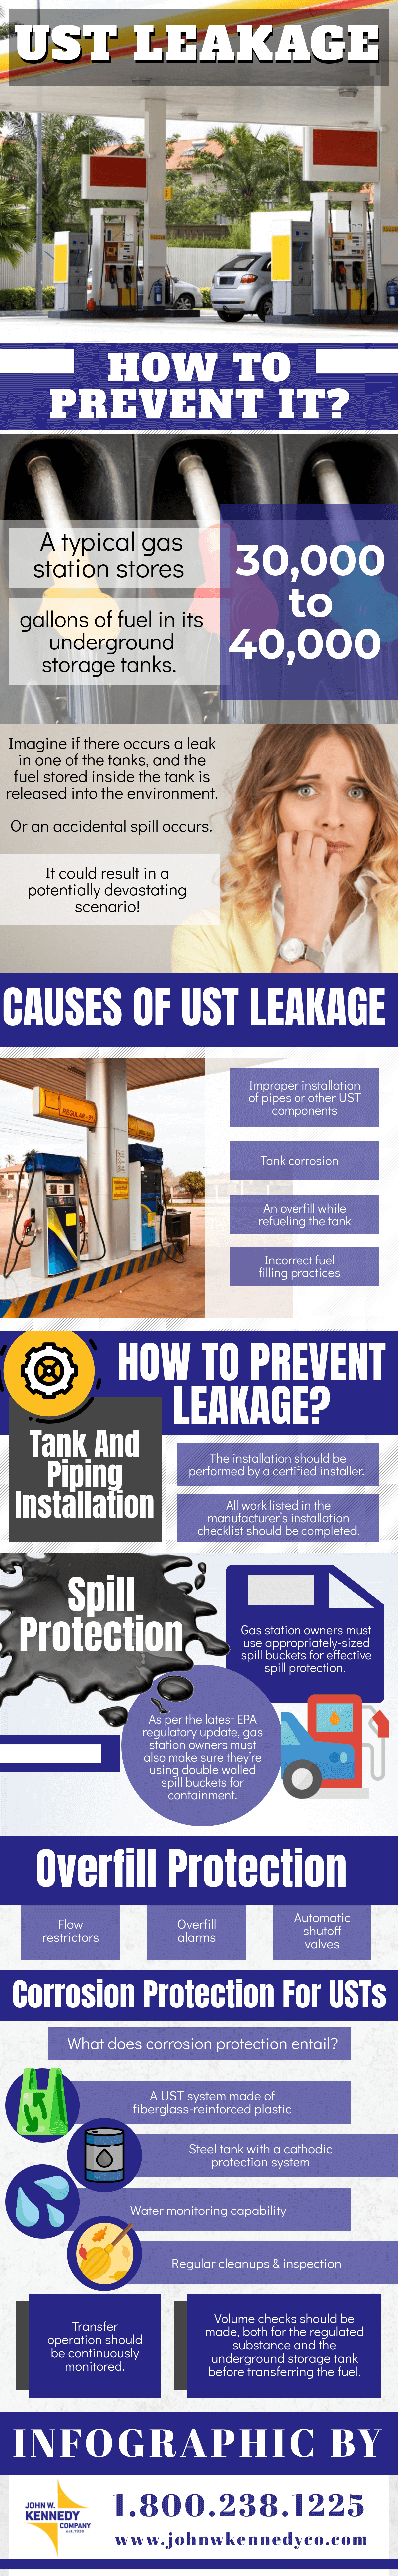 How to Prevent UST Leakage